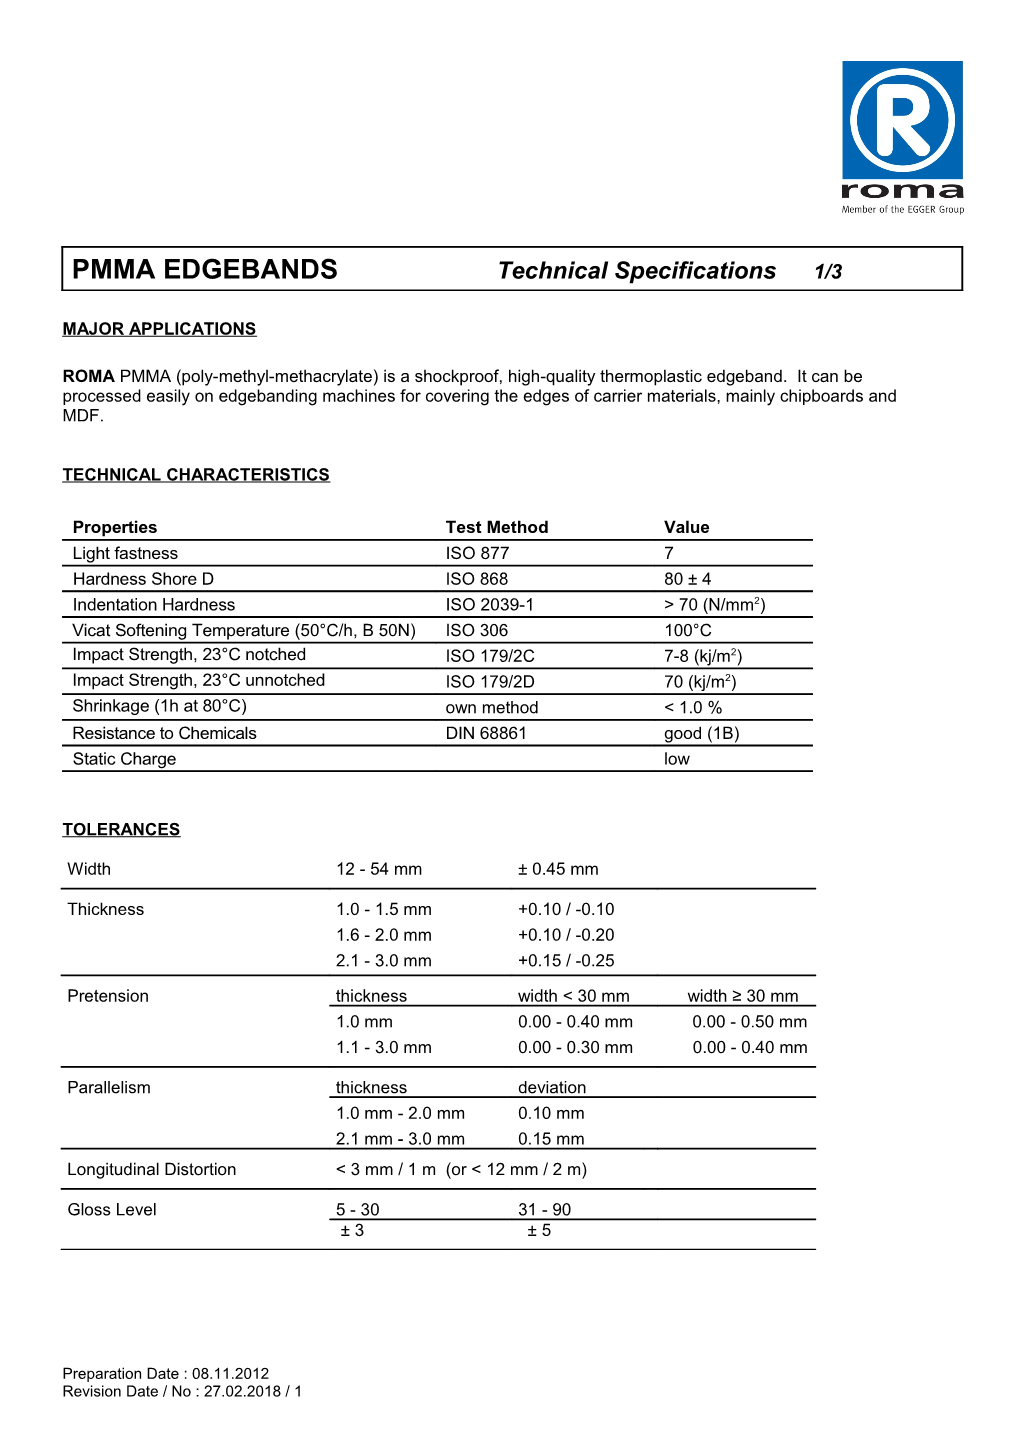 PMMA Edgebandstechnical Specifications 1/3